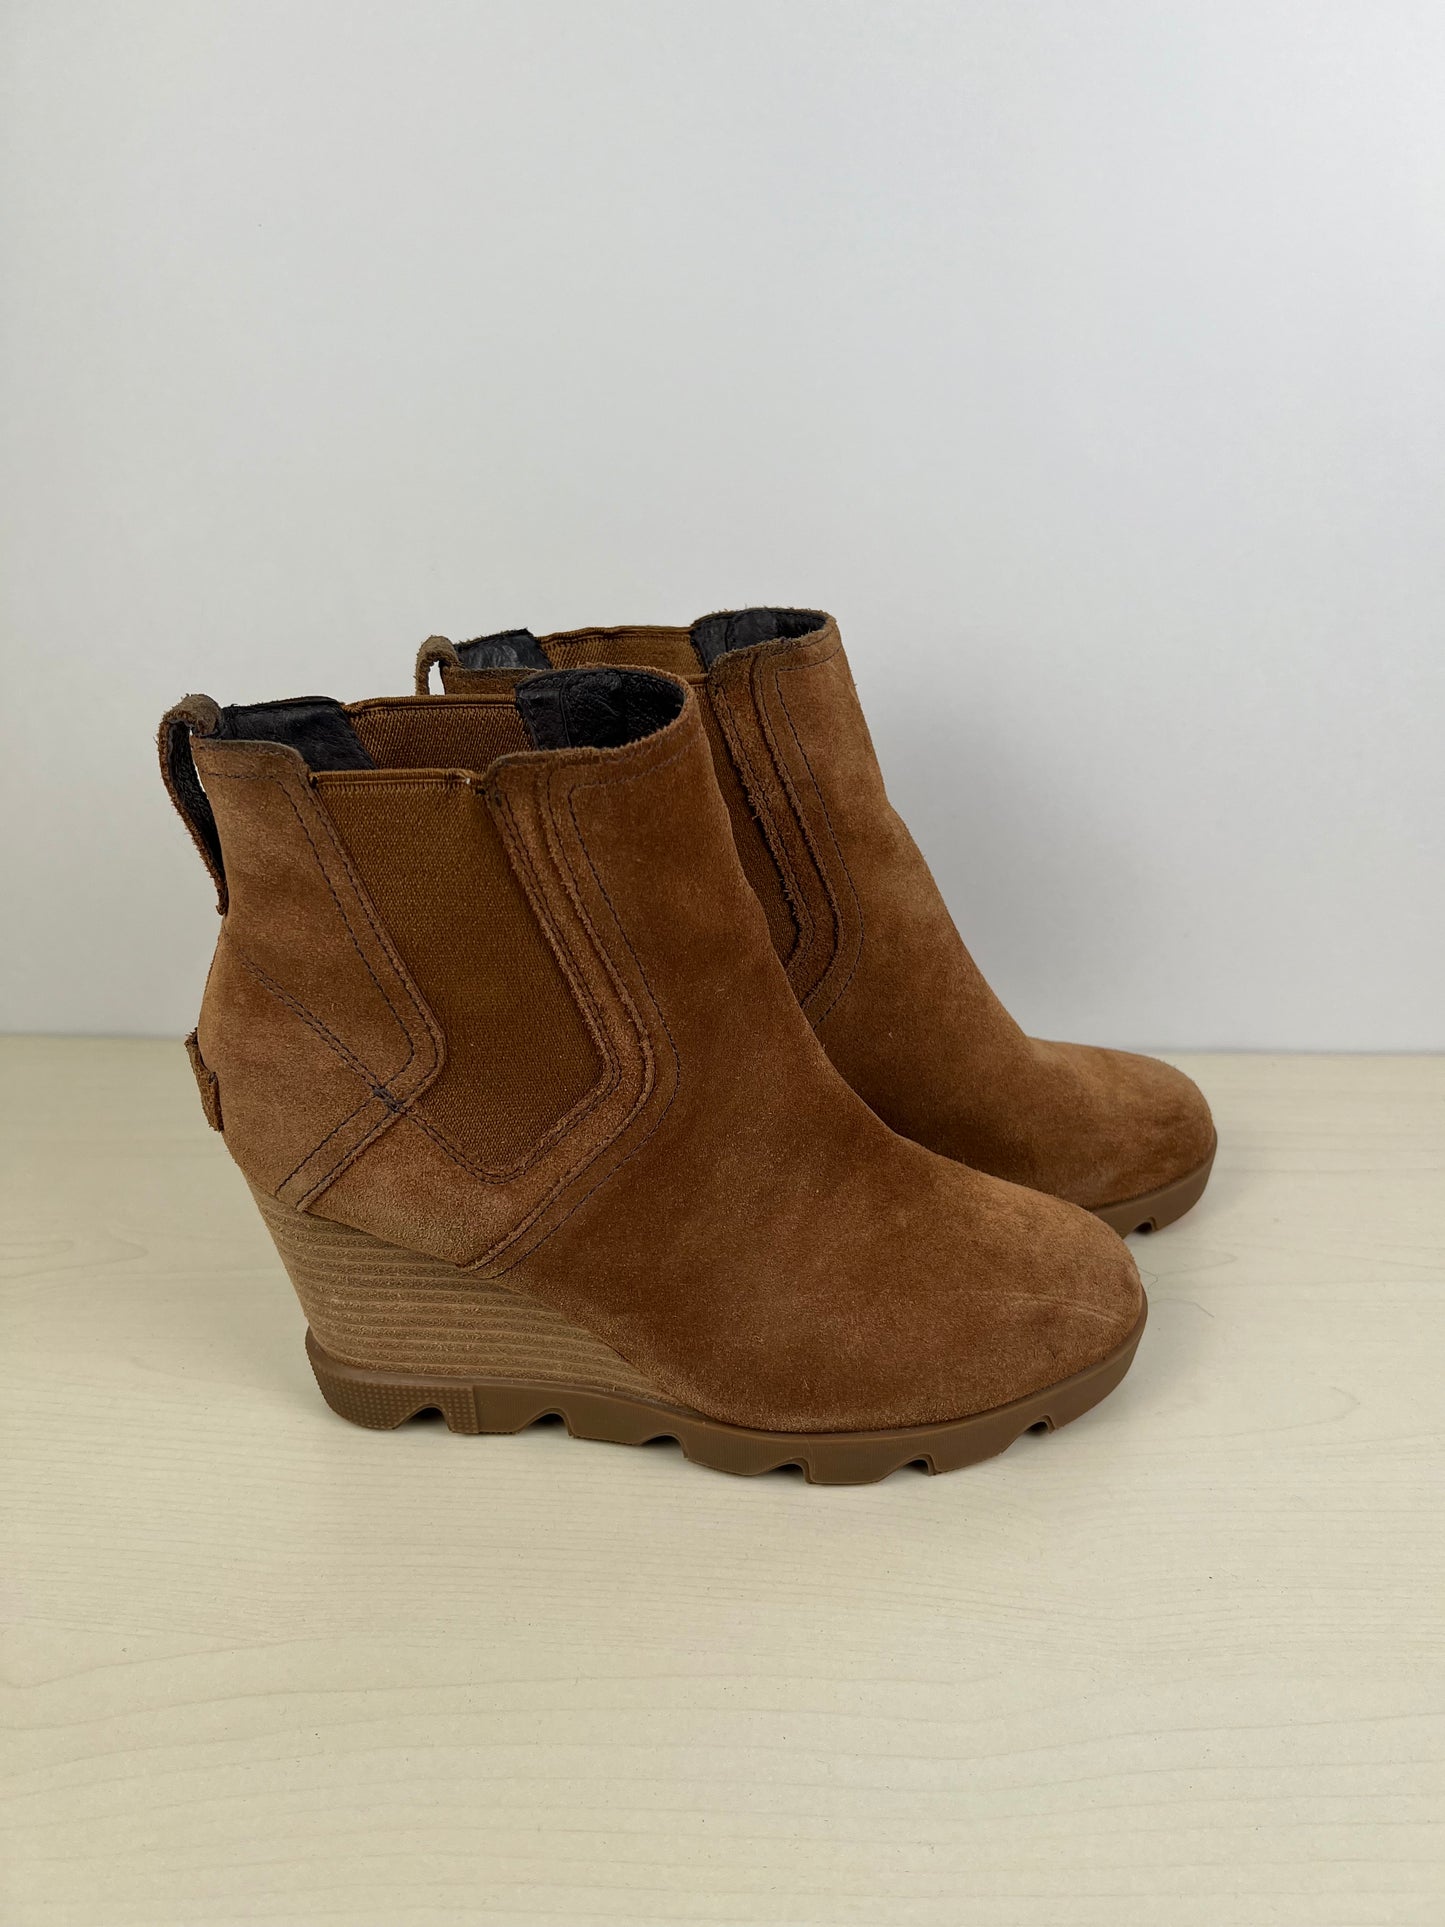 Boots Ankle Heels By Sorel  Size: 8.5